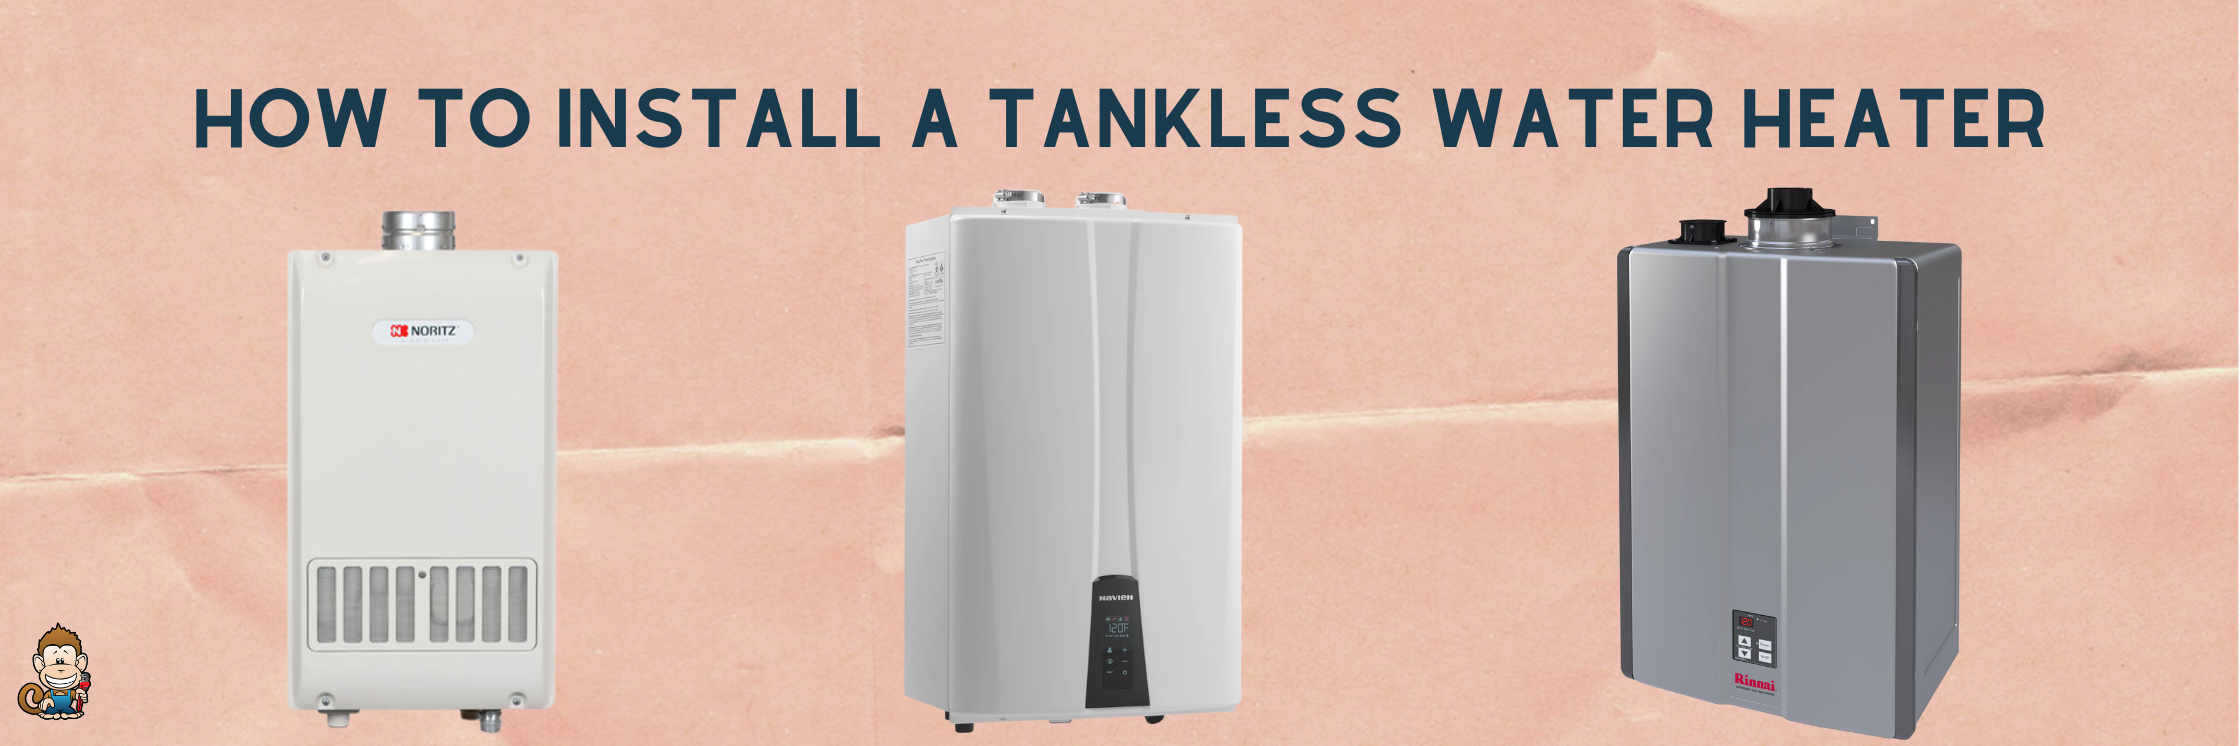 How To Install a Tankless Water Heater